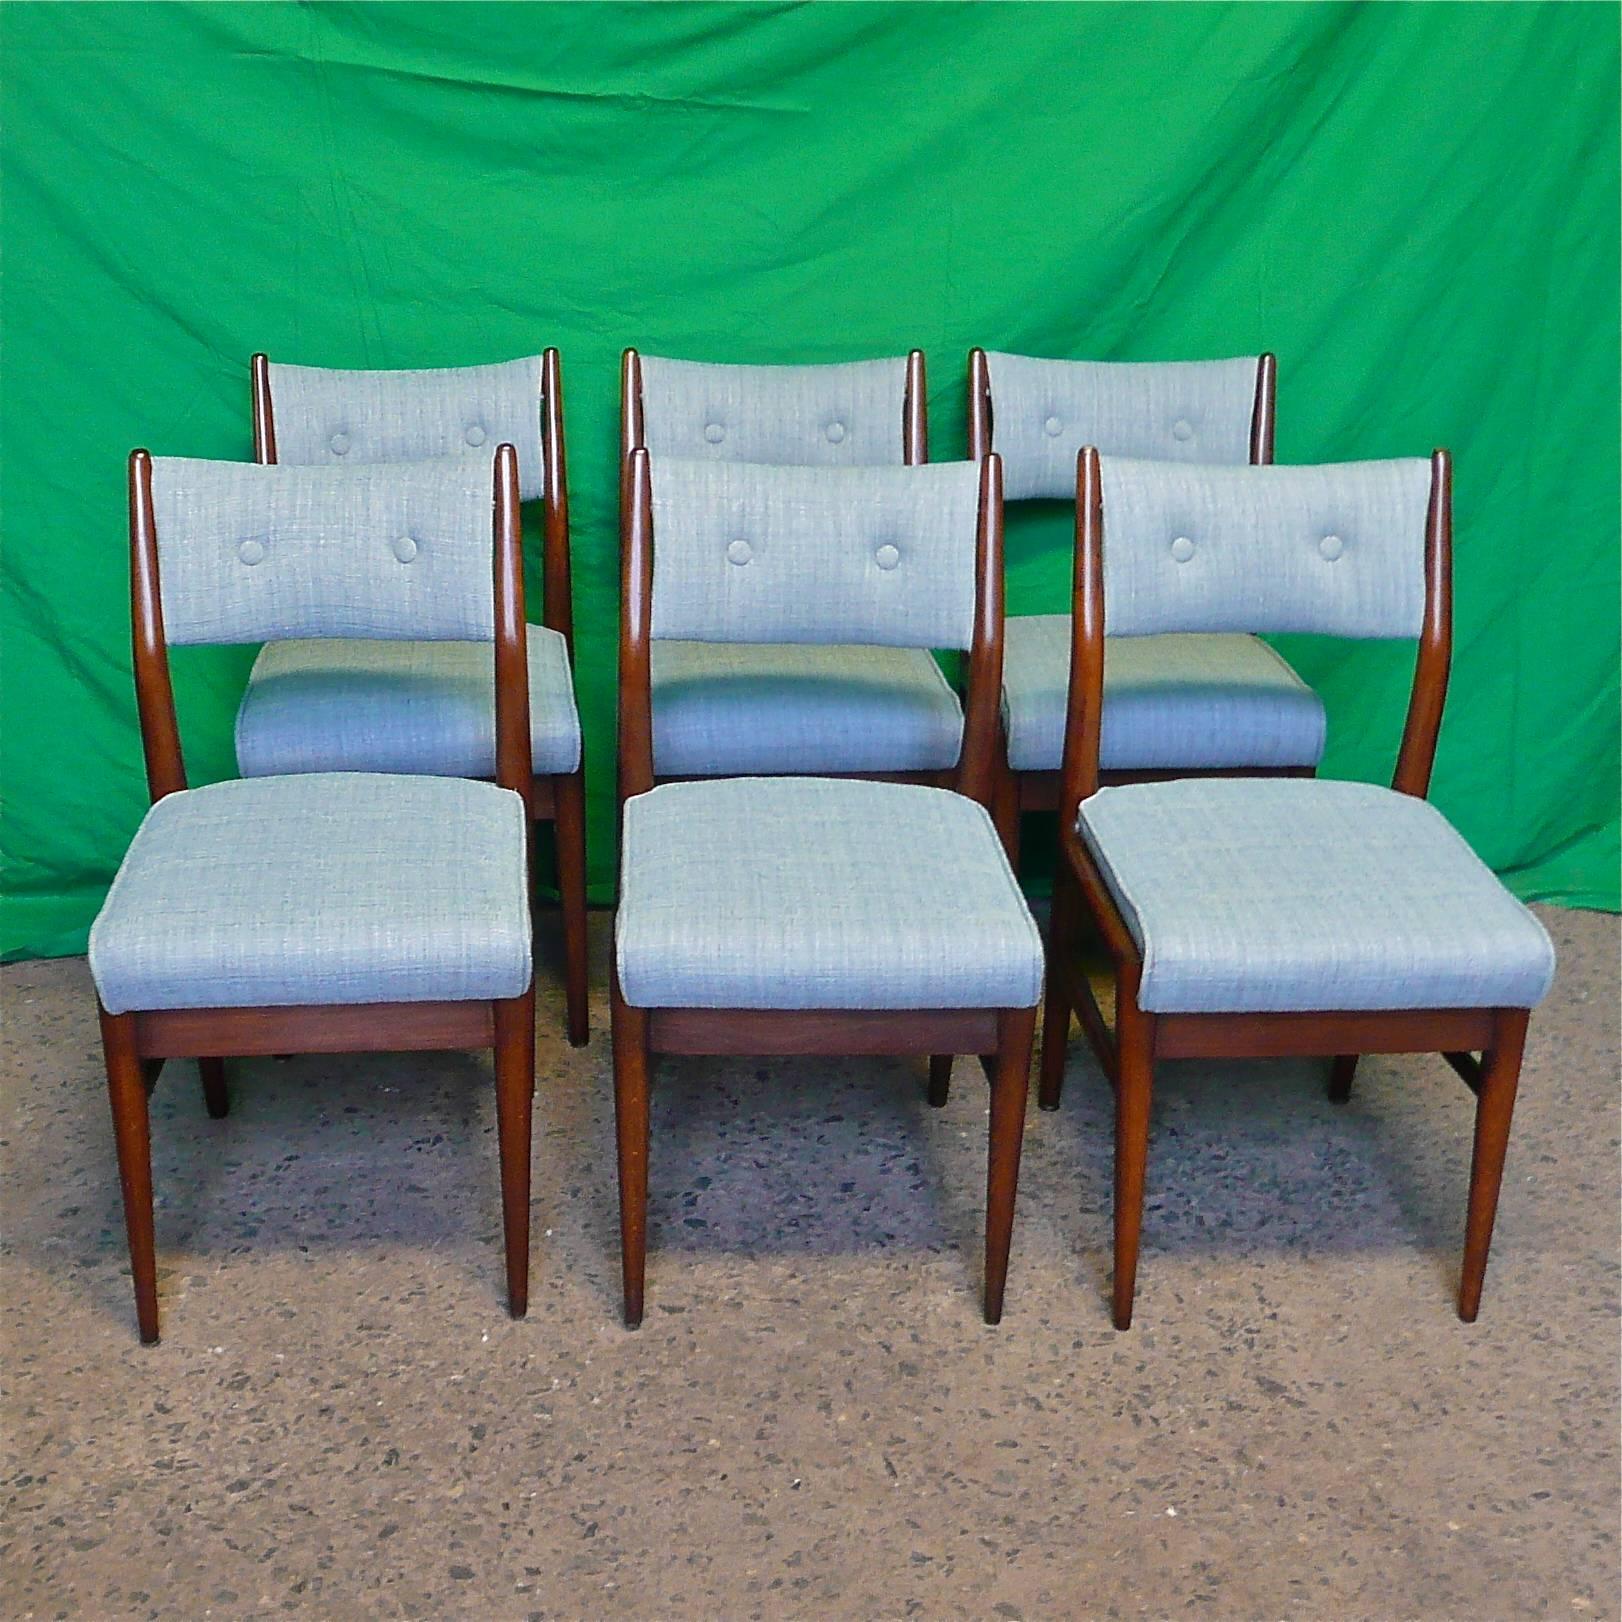 Set of 6, mid-century modern, walnut dining chairs in the manner of Gio Ponti are fully restored with a light blue woven cotton blend fabric